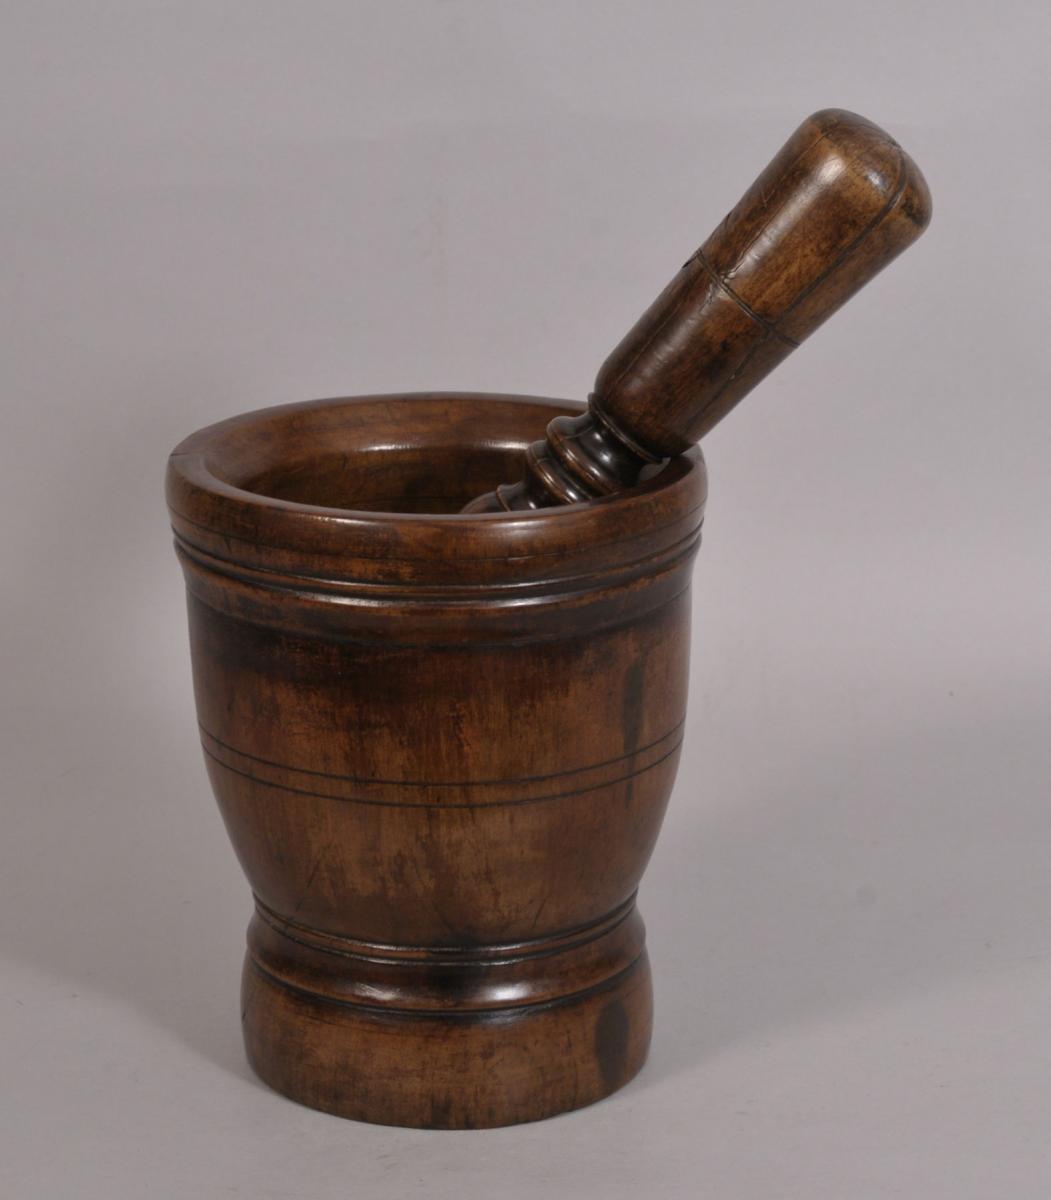 S/3216 Antique Treen 17th Century Fruitwood Pestle and Mortar